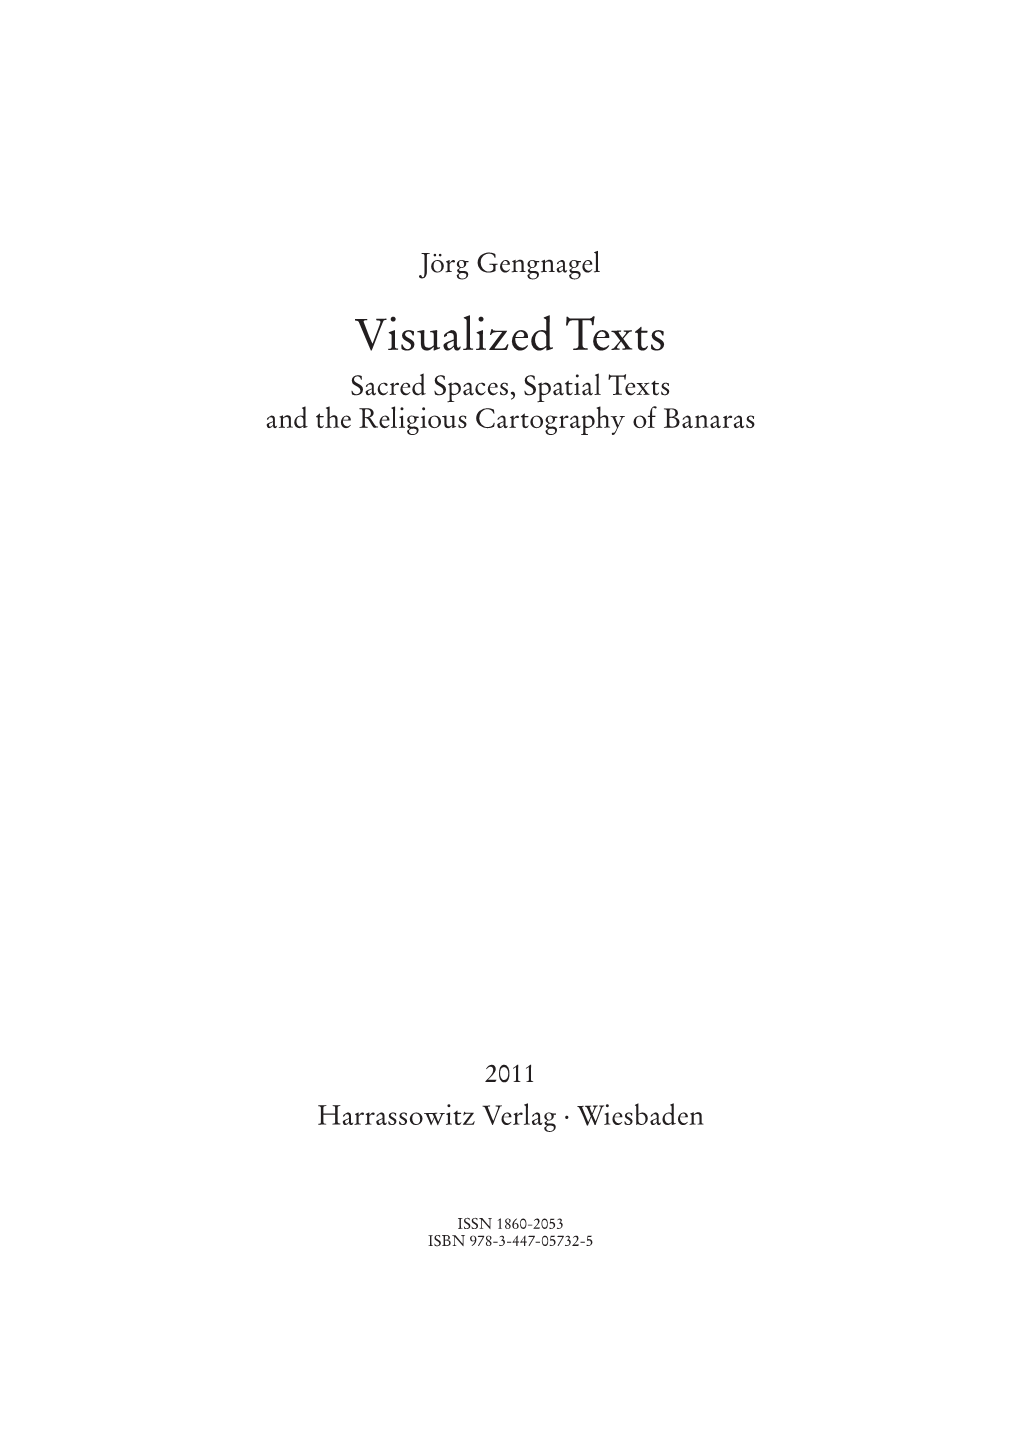 Visualized Texts. Sacred Spaces, Spatial Texts and the Religious Cartography of Banaras